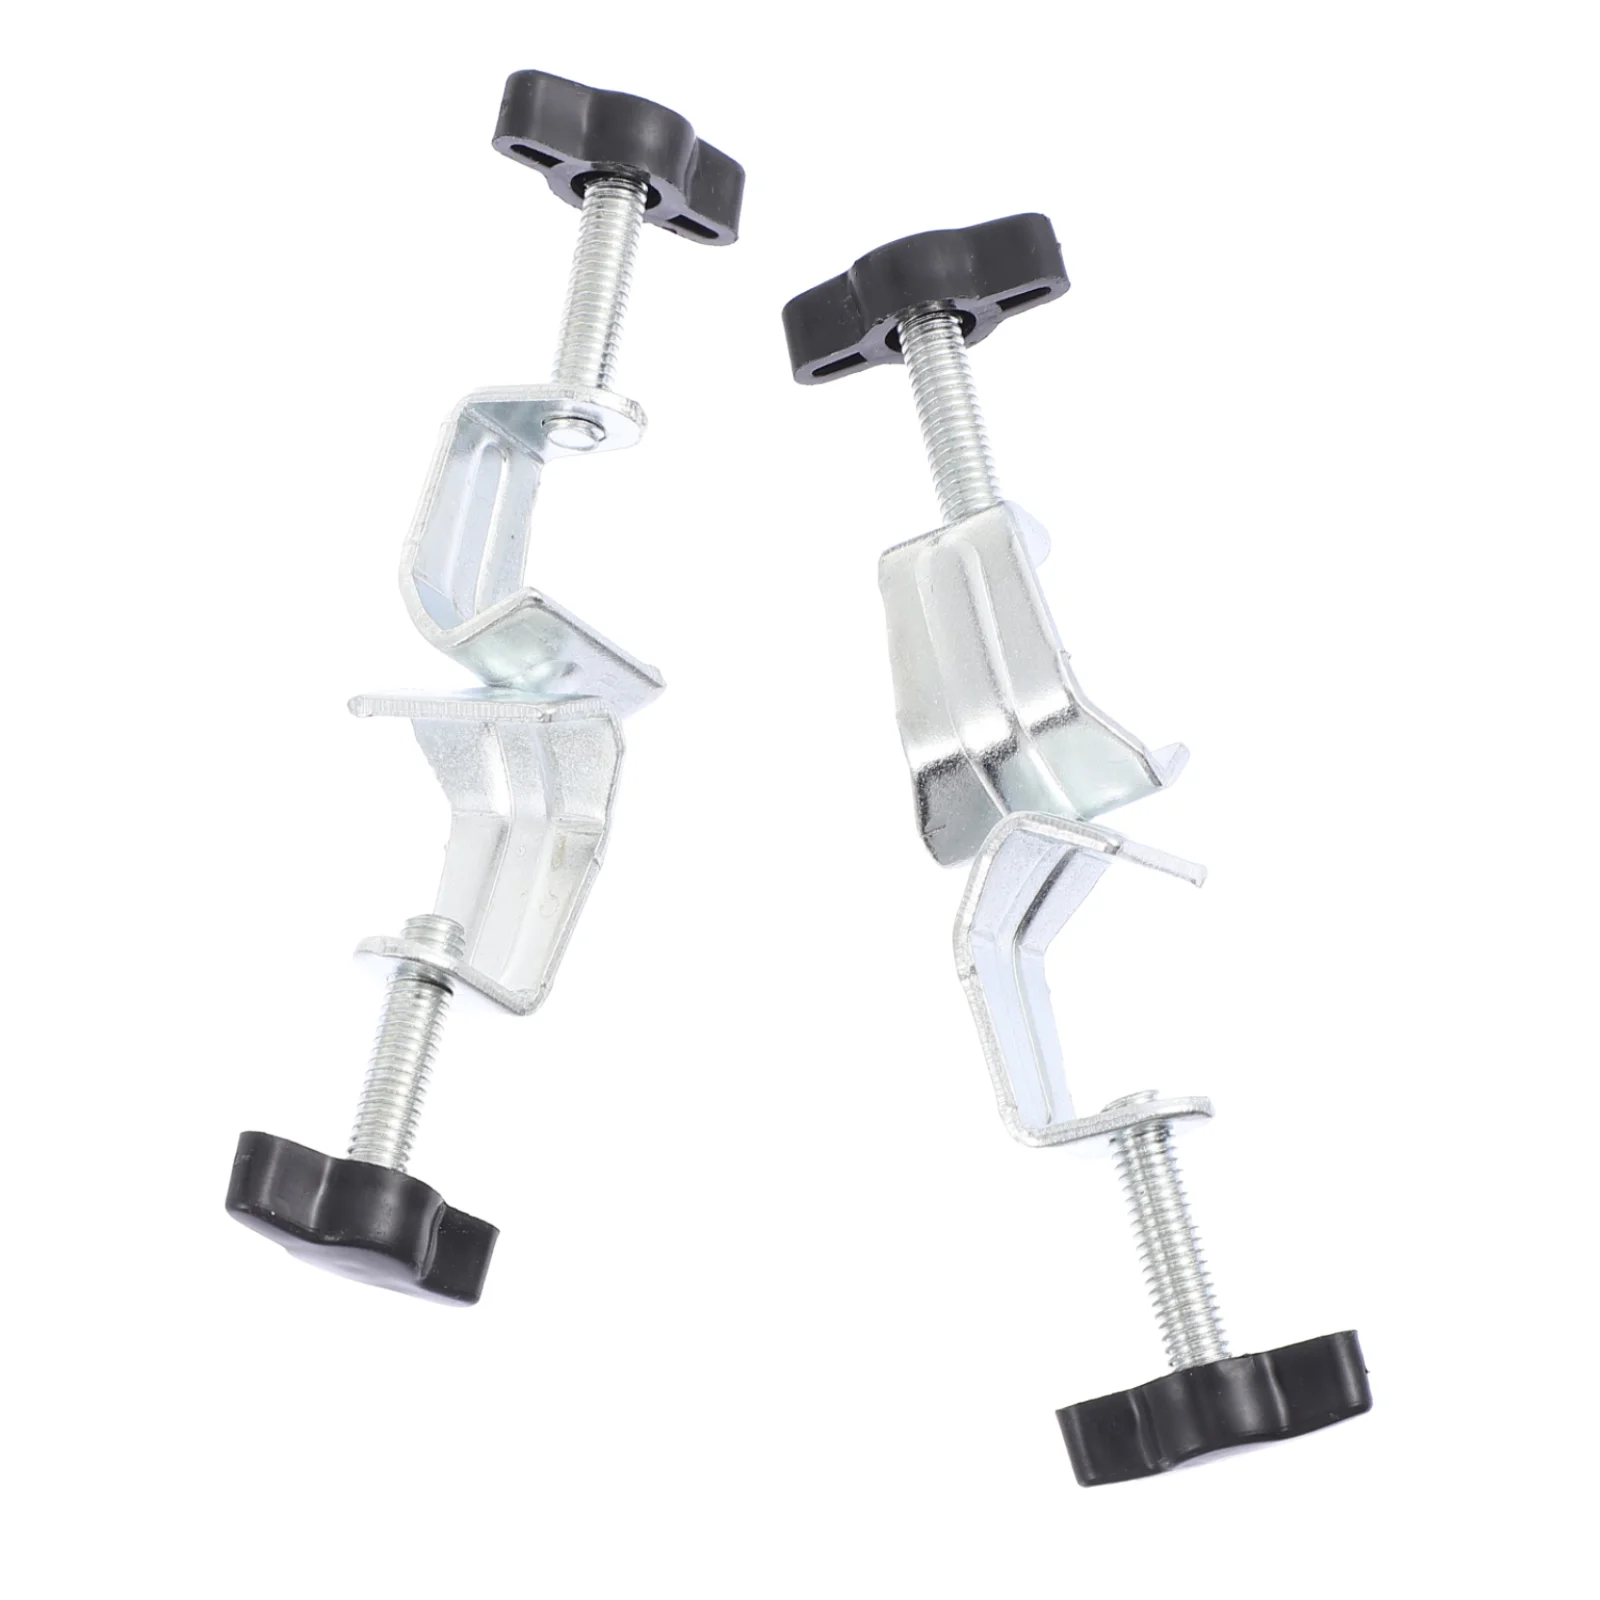 

Cross Clip Bosshead And Clamp Right Angle Bracket Cable Rodsoratory Laboratory Supplies Supplies Chemistry Control Clip Stand